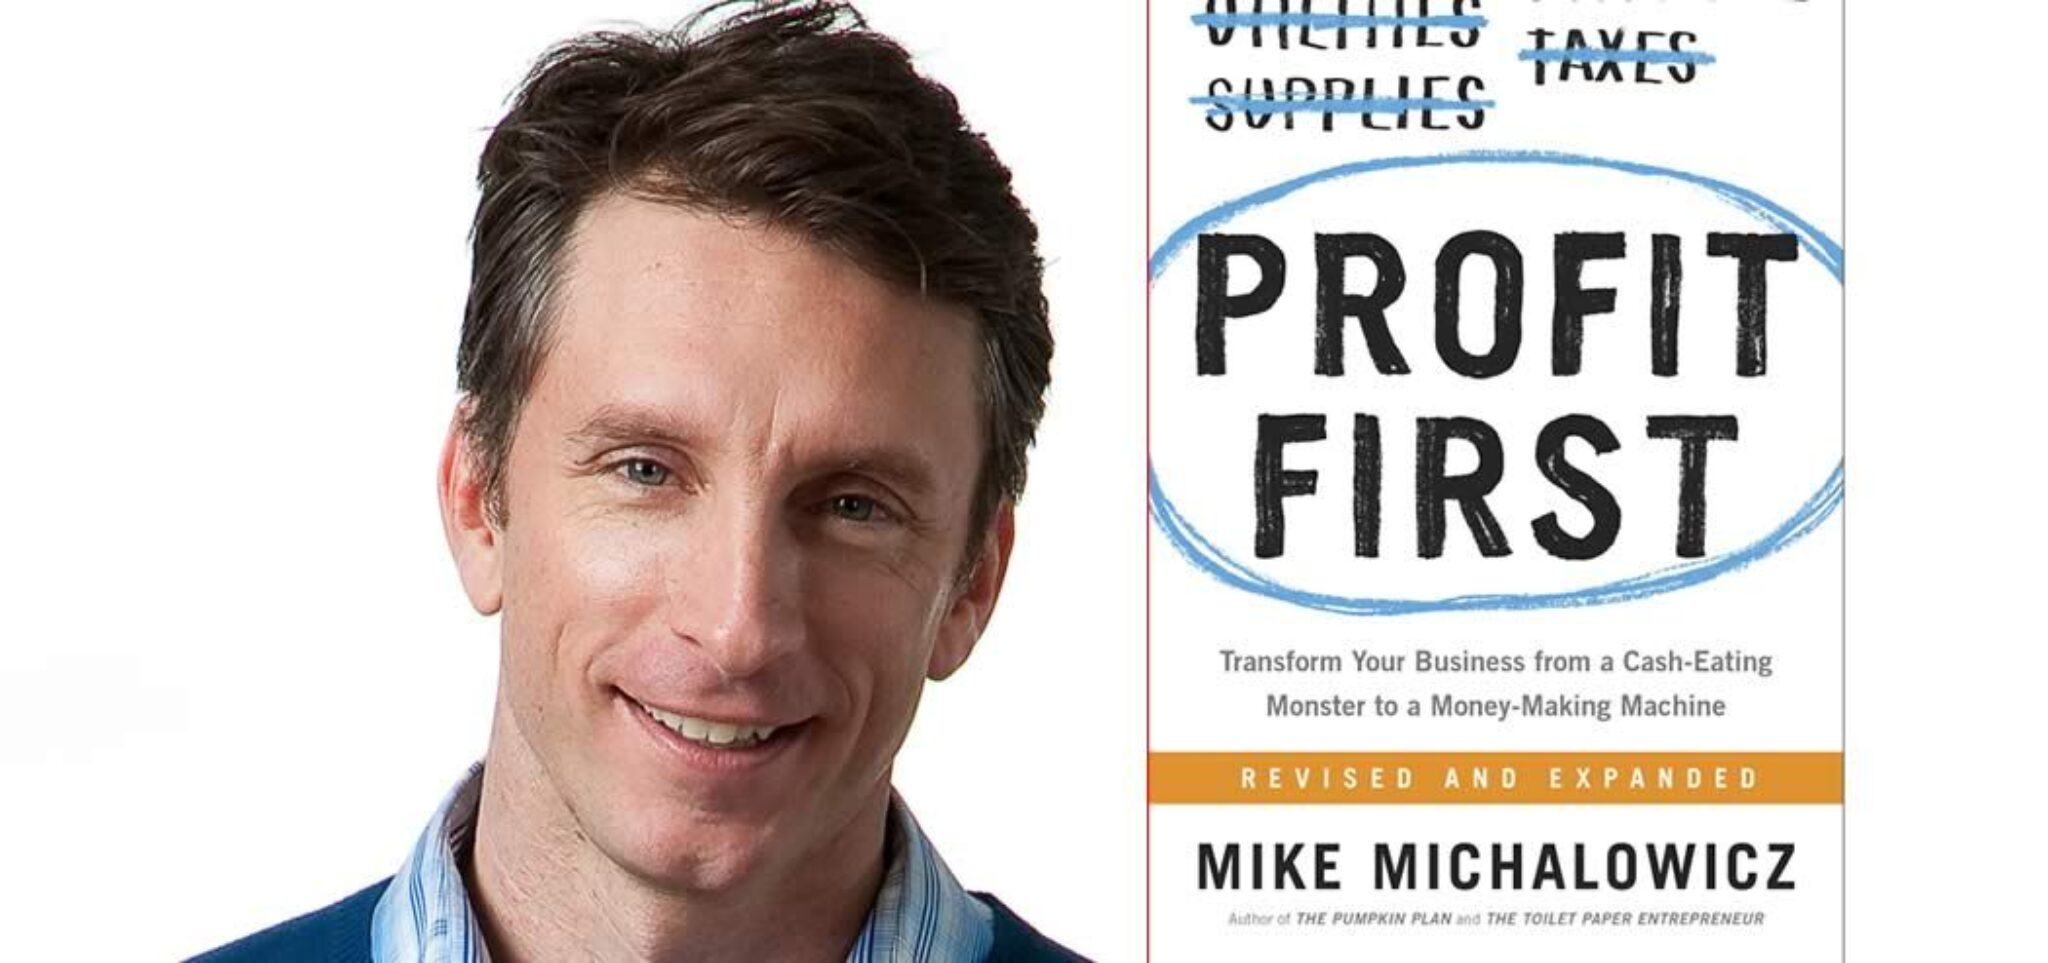 Даст first. Profit first. Profit first система. Profit first: transform your Business from a Cash-eating Monster to a money-making Machine by Mike Michalowicz pdf.